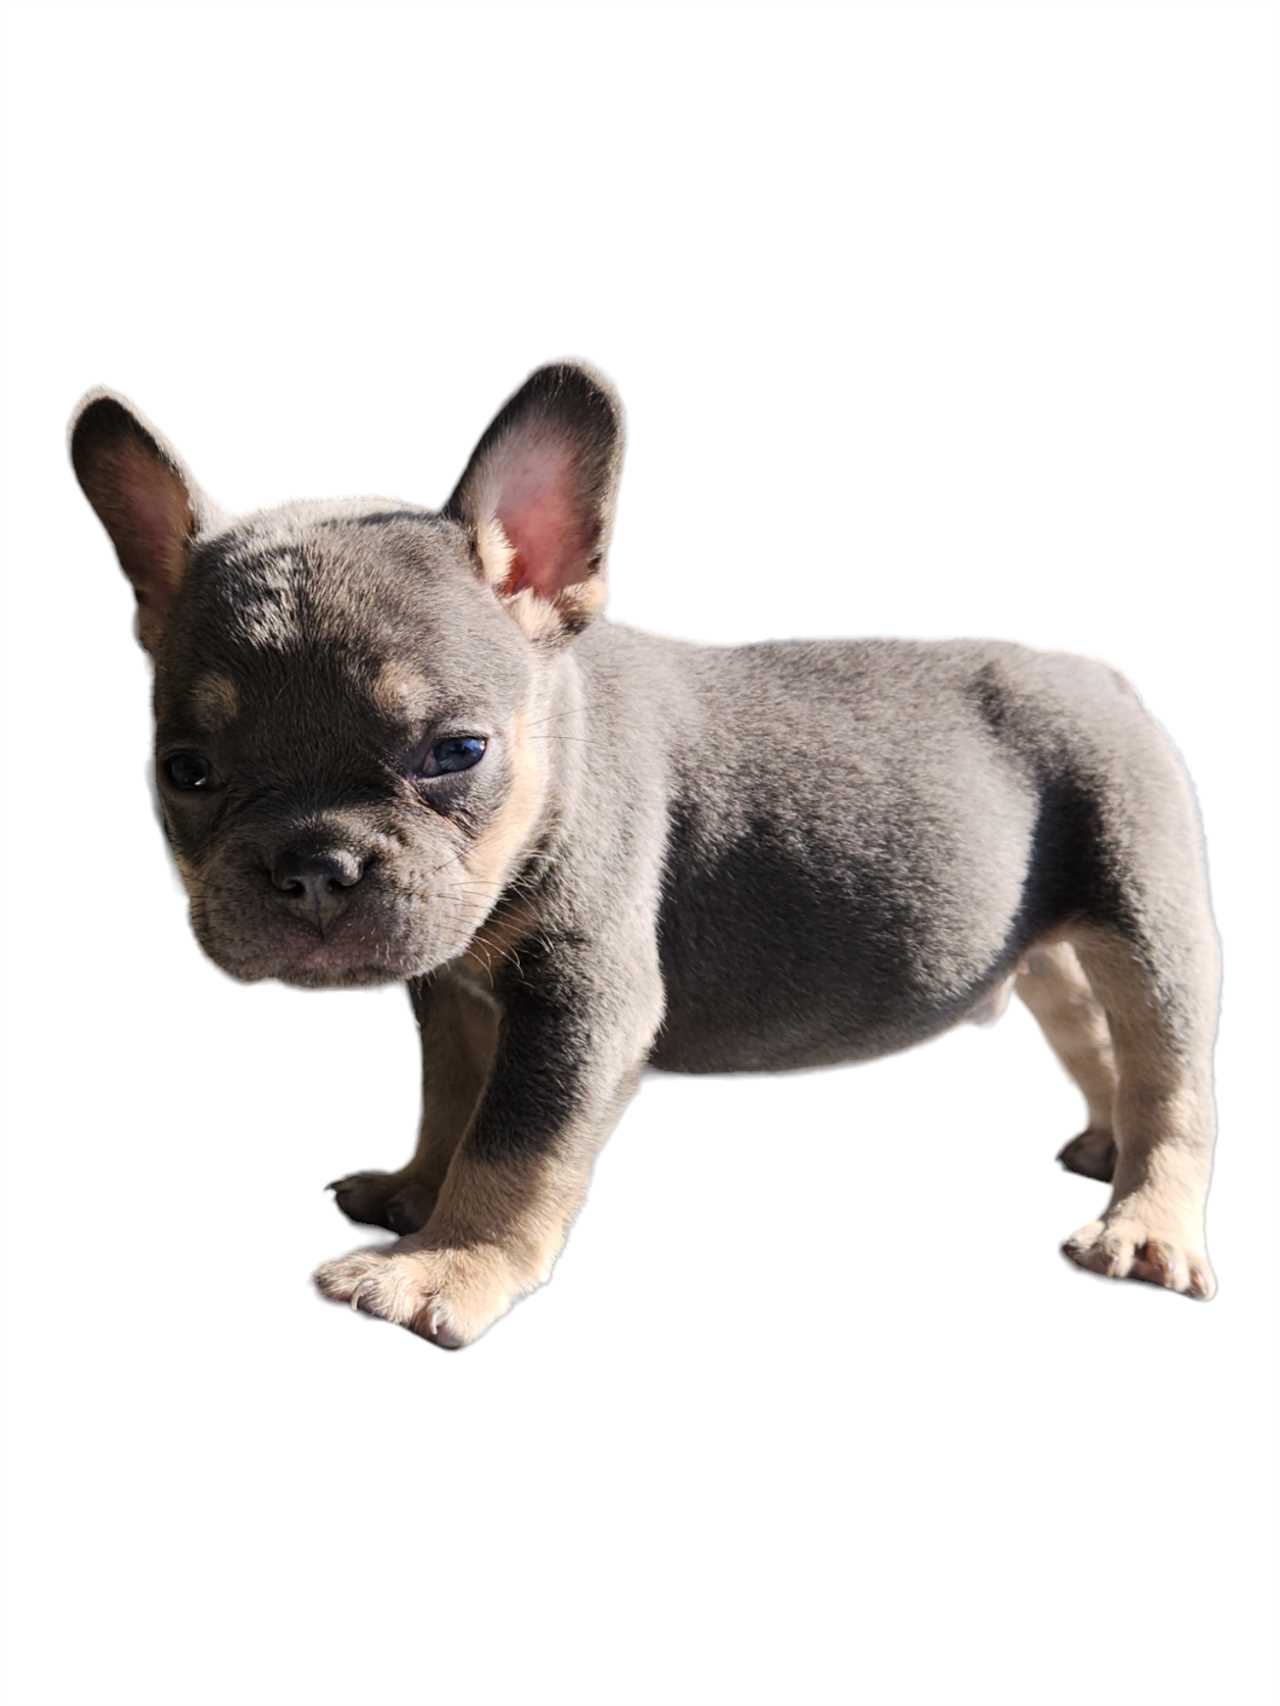 Grooming Tips for Blue Tri French Bulldogs